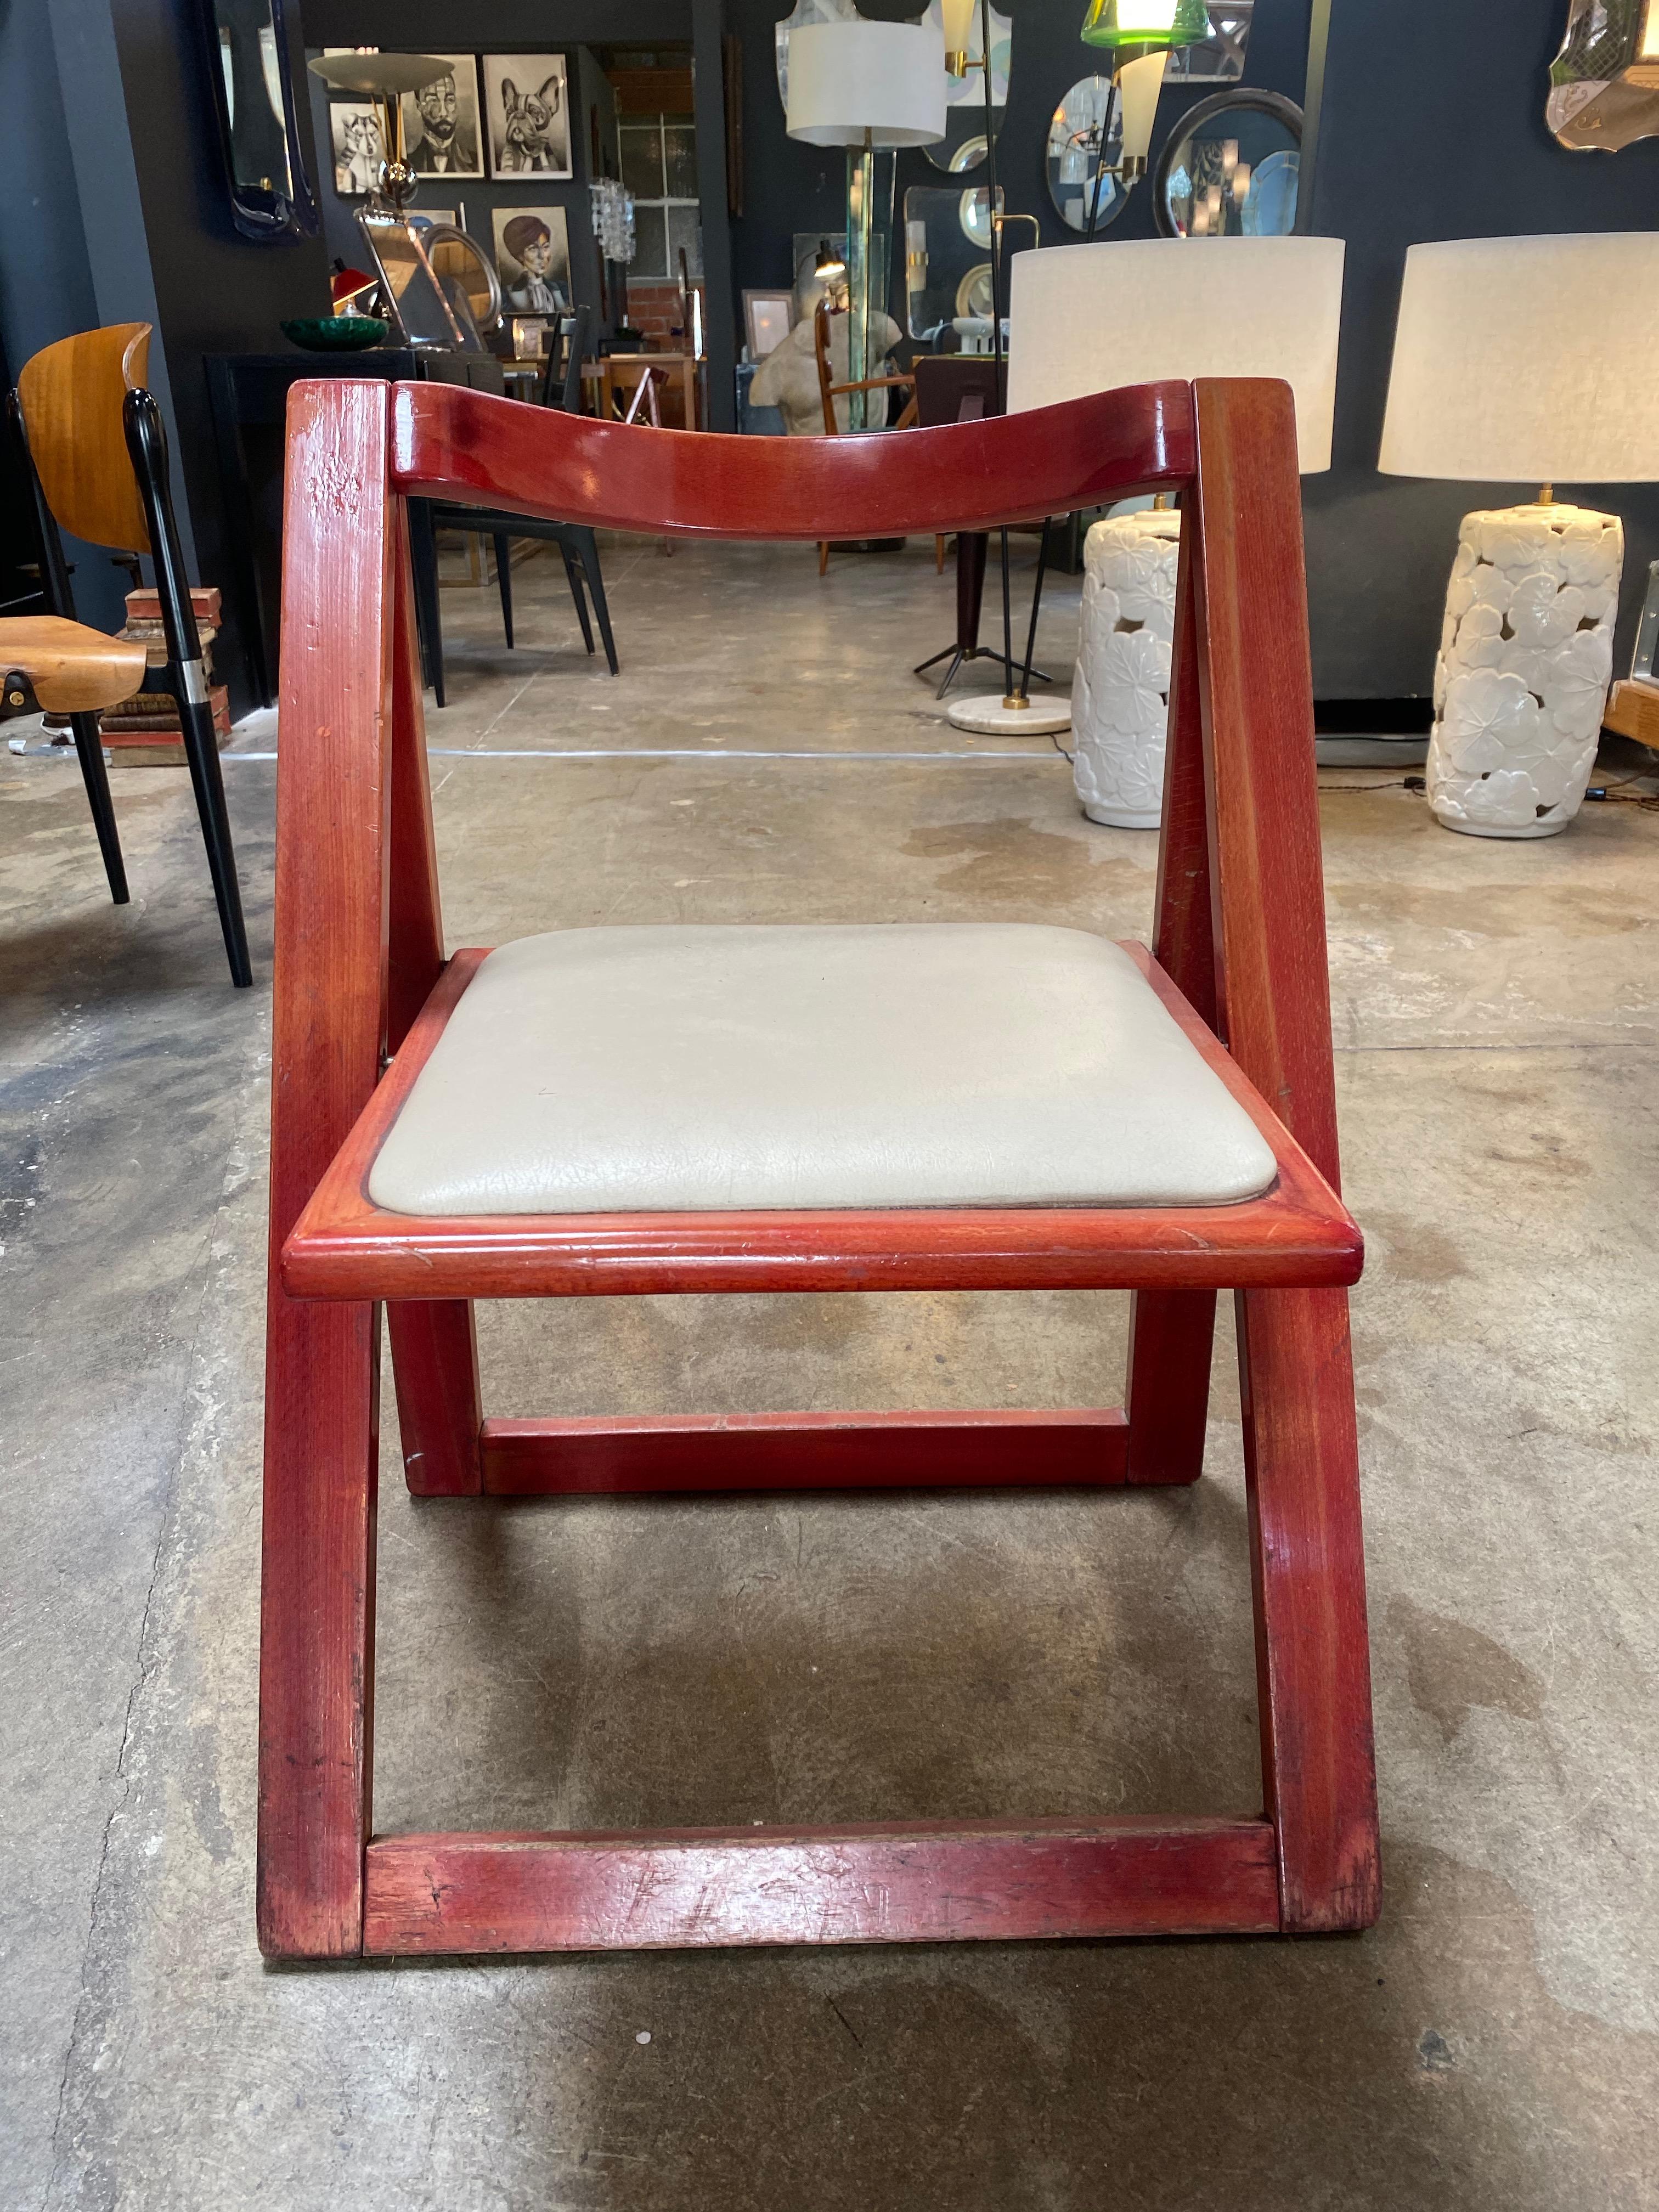 vintage wooden folding chair with leather seat